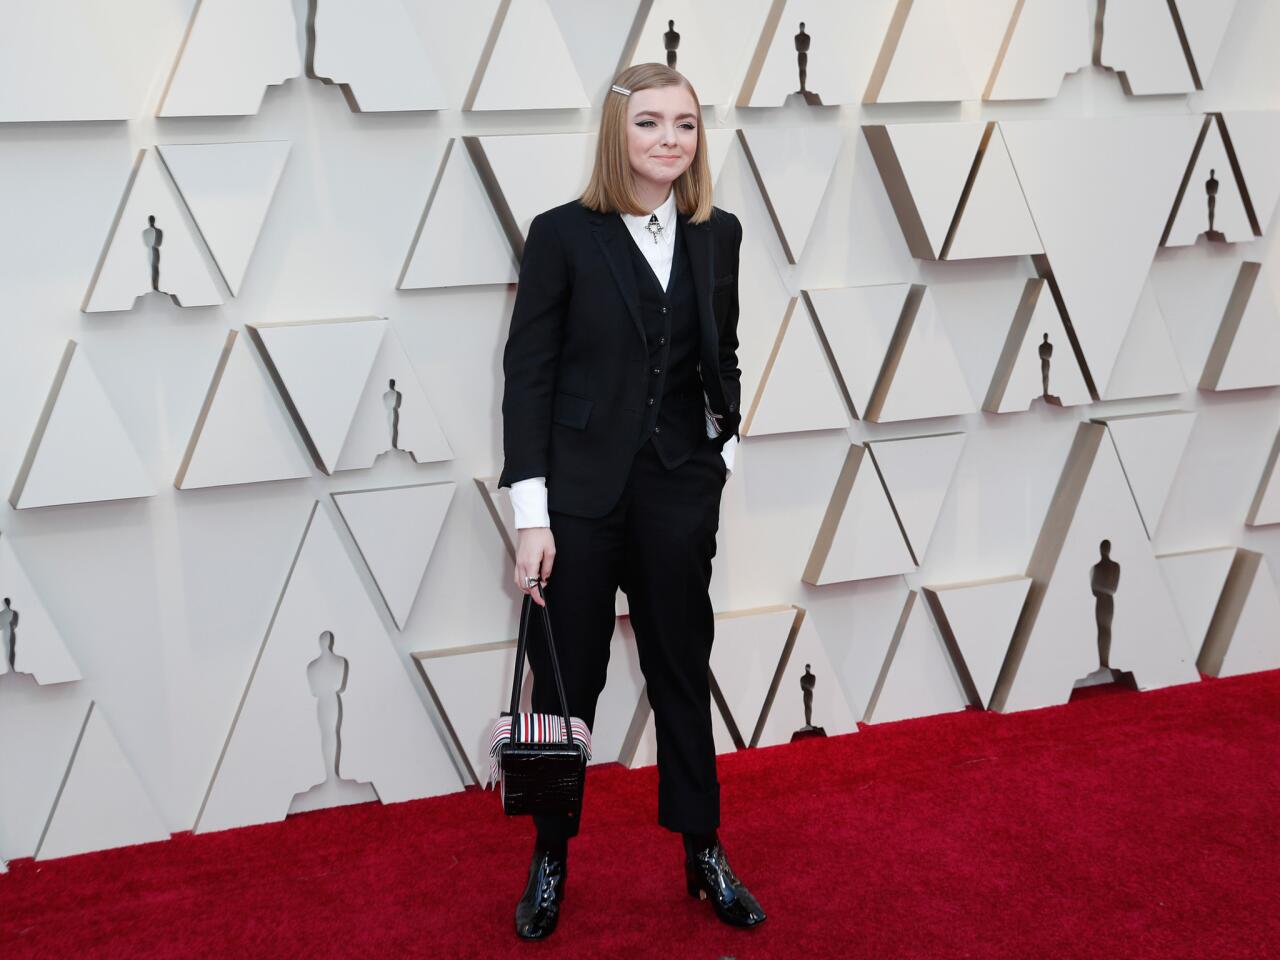 HIT: Elsie Fisher brings a touch of gender-bending to the carpet courtesy of a Thom Browne suit and laced-up platform boots.